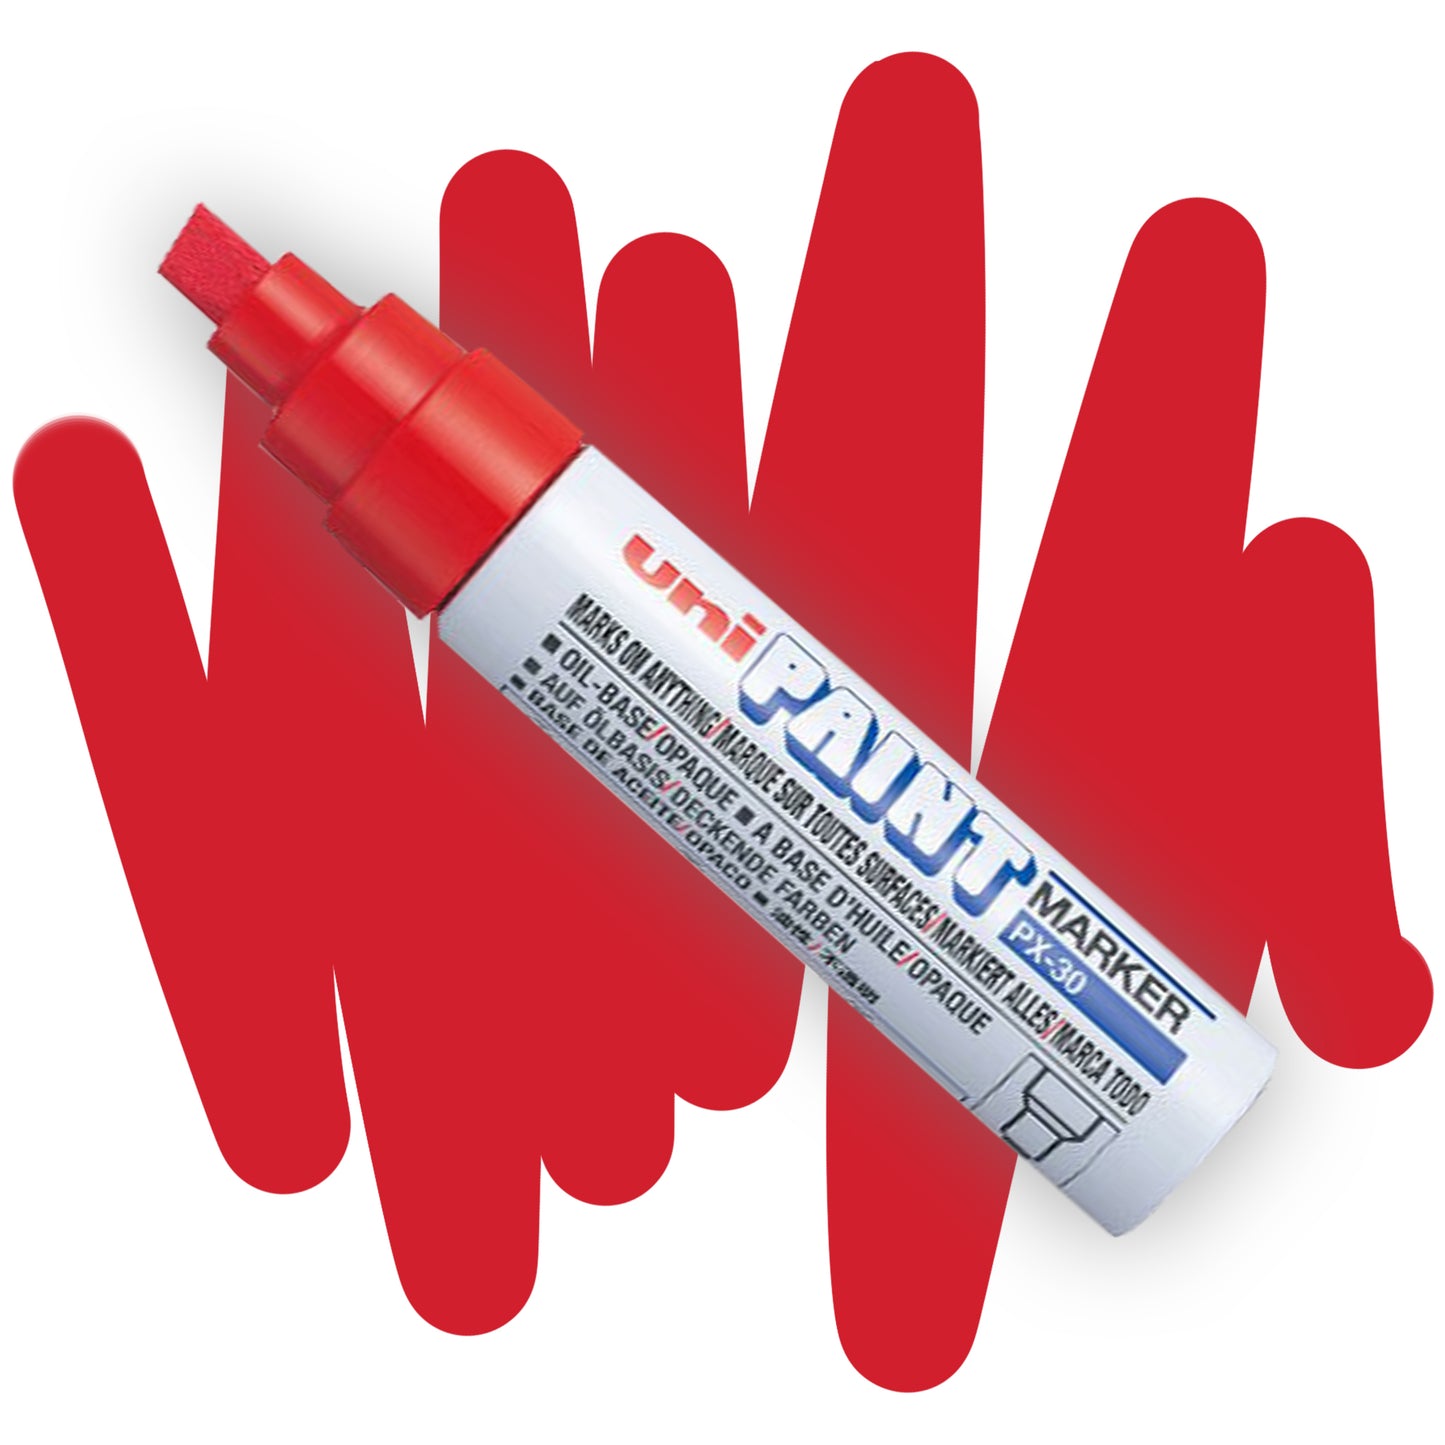 Uni paint chisel tip markers px-30 in red.